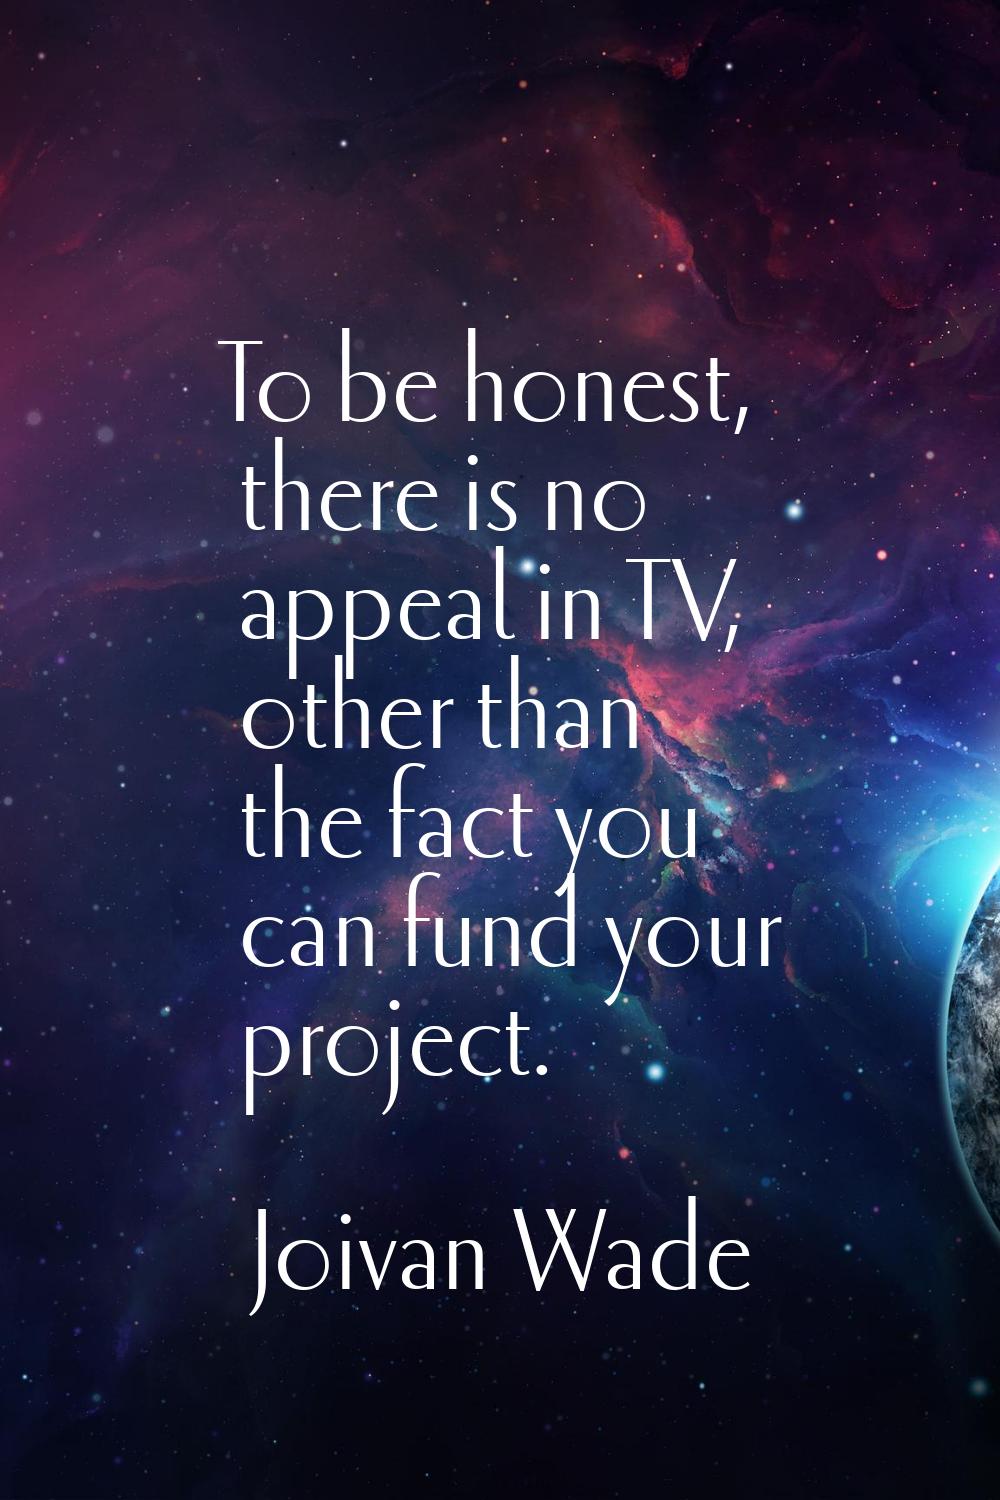 To be honest, there is no appeal in TV, other than the fact you can fund your project.